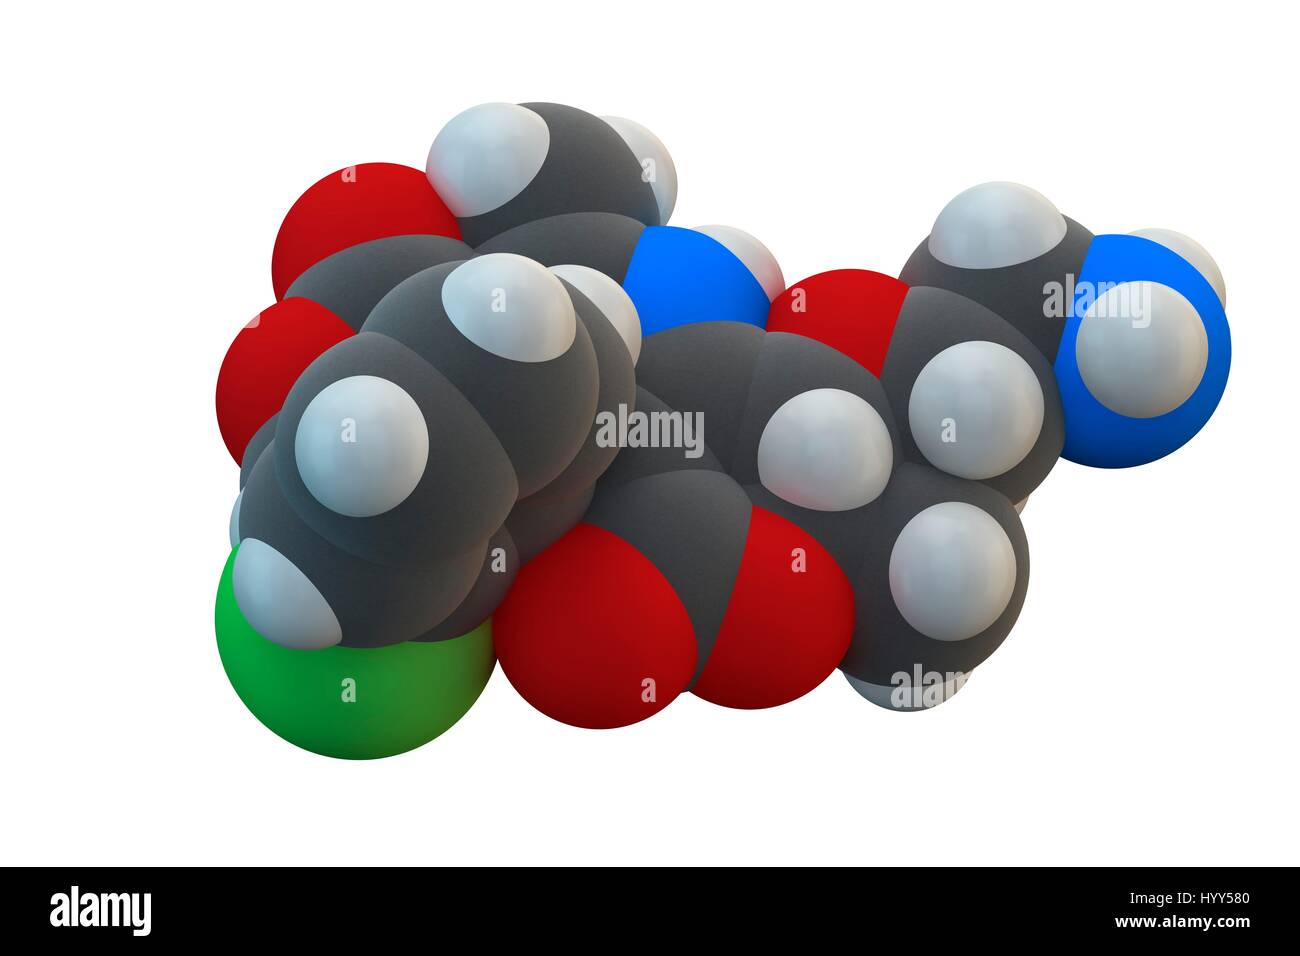 Amlodipine hypertension (high blood pressure) drug molecule. Chemical formula is C20H25ClN2O5. Atoms are represented as spheres: carbon (grey), hydrogen (white), chlorine (green), nitrogen (blue), oxygen (red). Illustration. Stock Photo